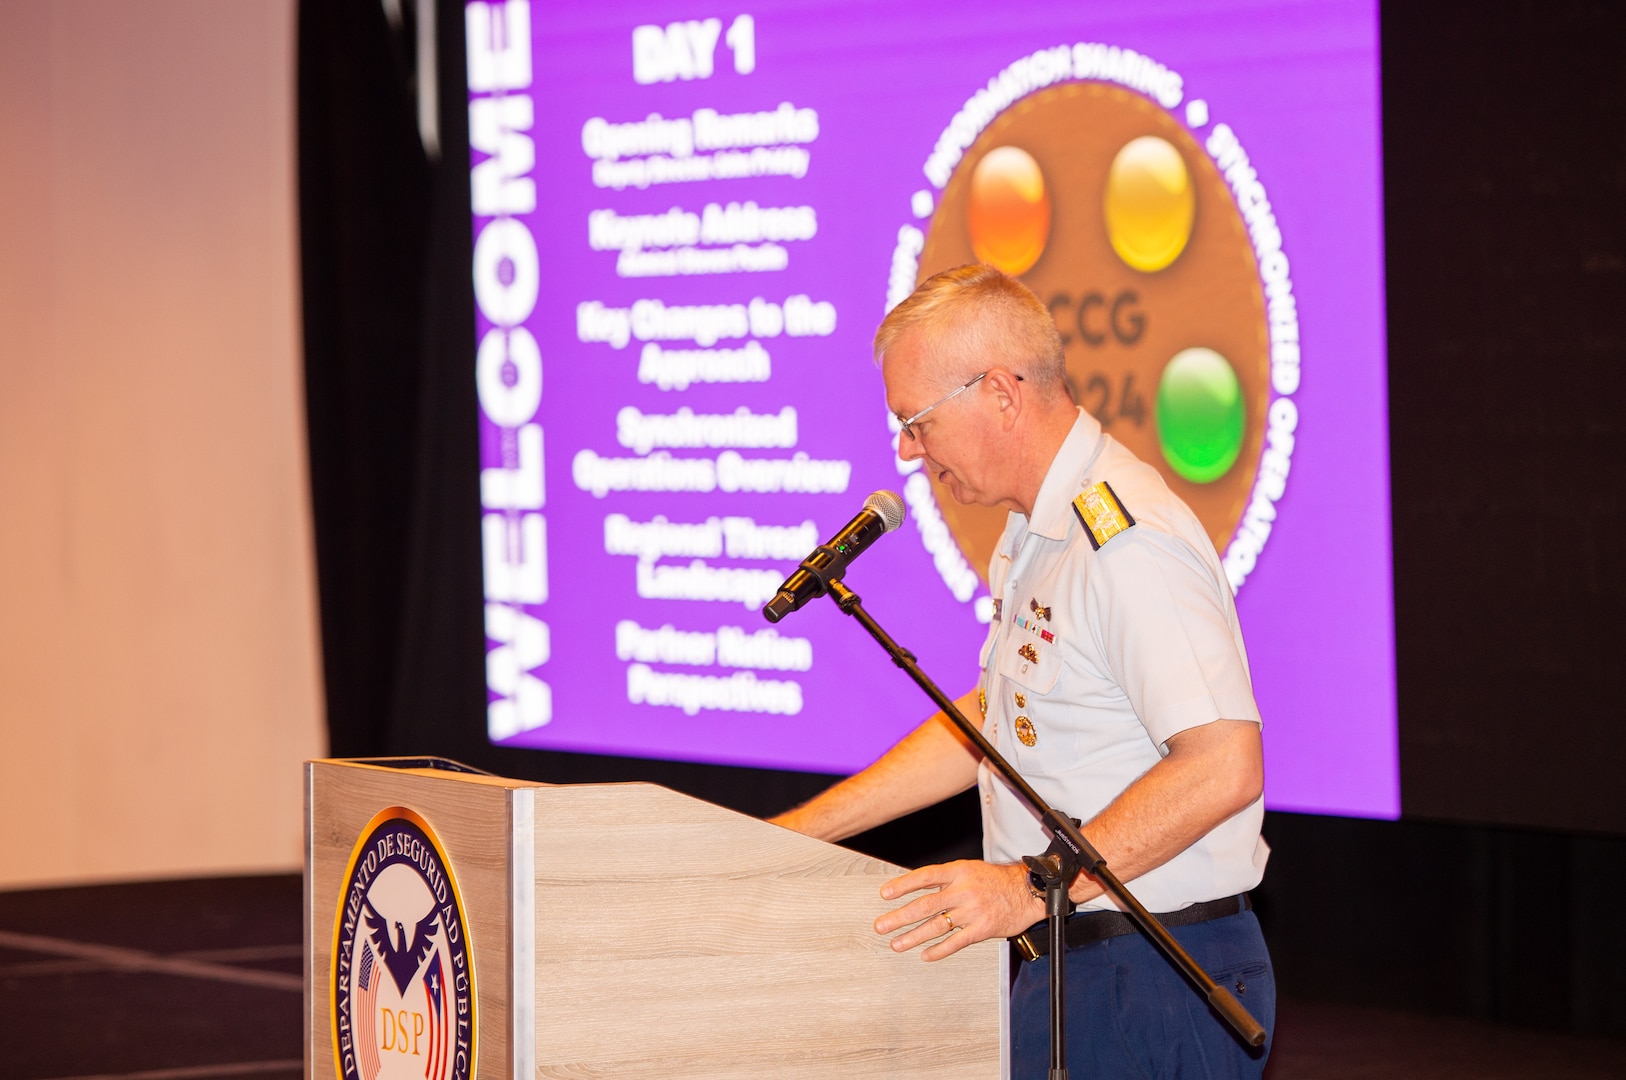 The Vice Commandant of the U.S. Coast Guard Adm. Steven Poulin speaks at an Eastern Caribbean Combined Coordination Group (ECCG) meeting April 23-25, in San Juan, Puerto Rico. ECCG met to discuss increasing coordination to unify action against illicit market-driven flows that include human trafficking, human smuggling, the export of arms and monetary instruments, environmental crimes, and the movement of illicit drugs within the Eastern Caribbean Joint Operating Area